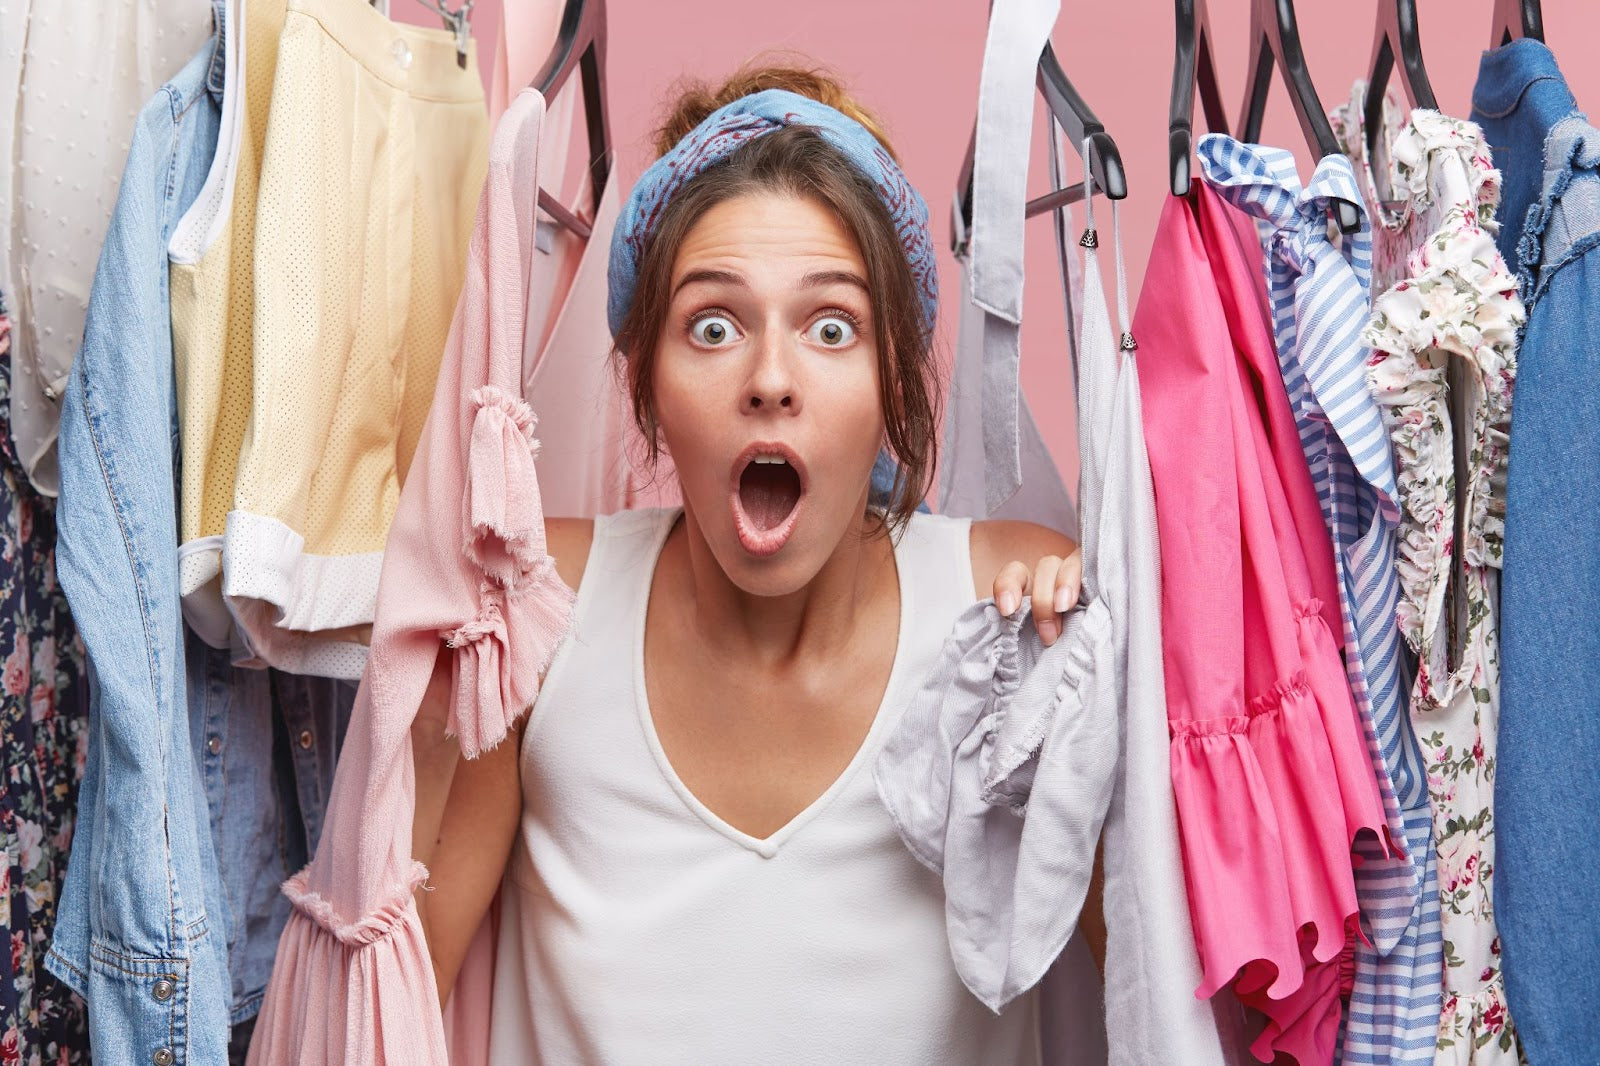 a woman browsing through a closet filled with dress tees, base tees, and camisole for layering